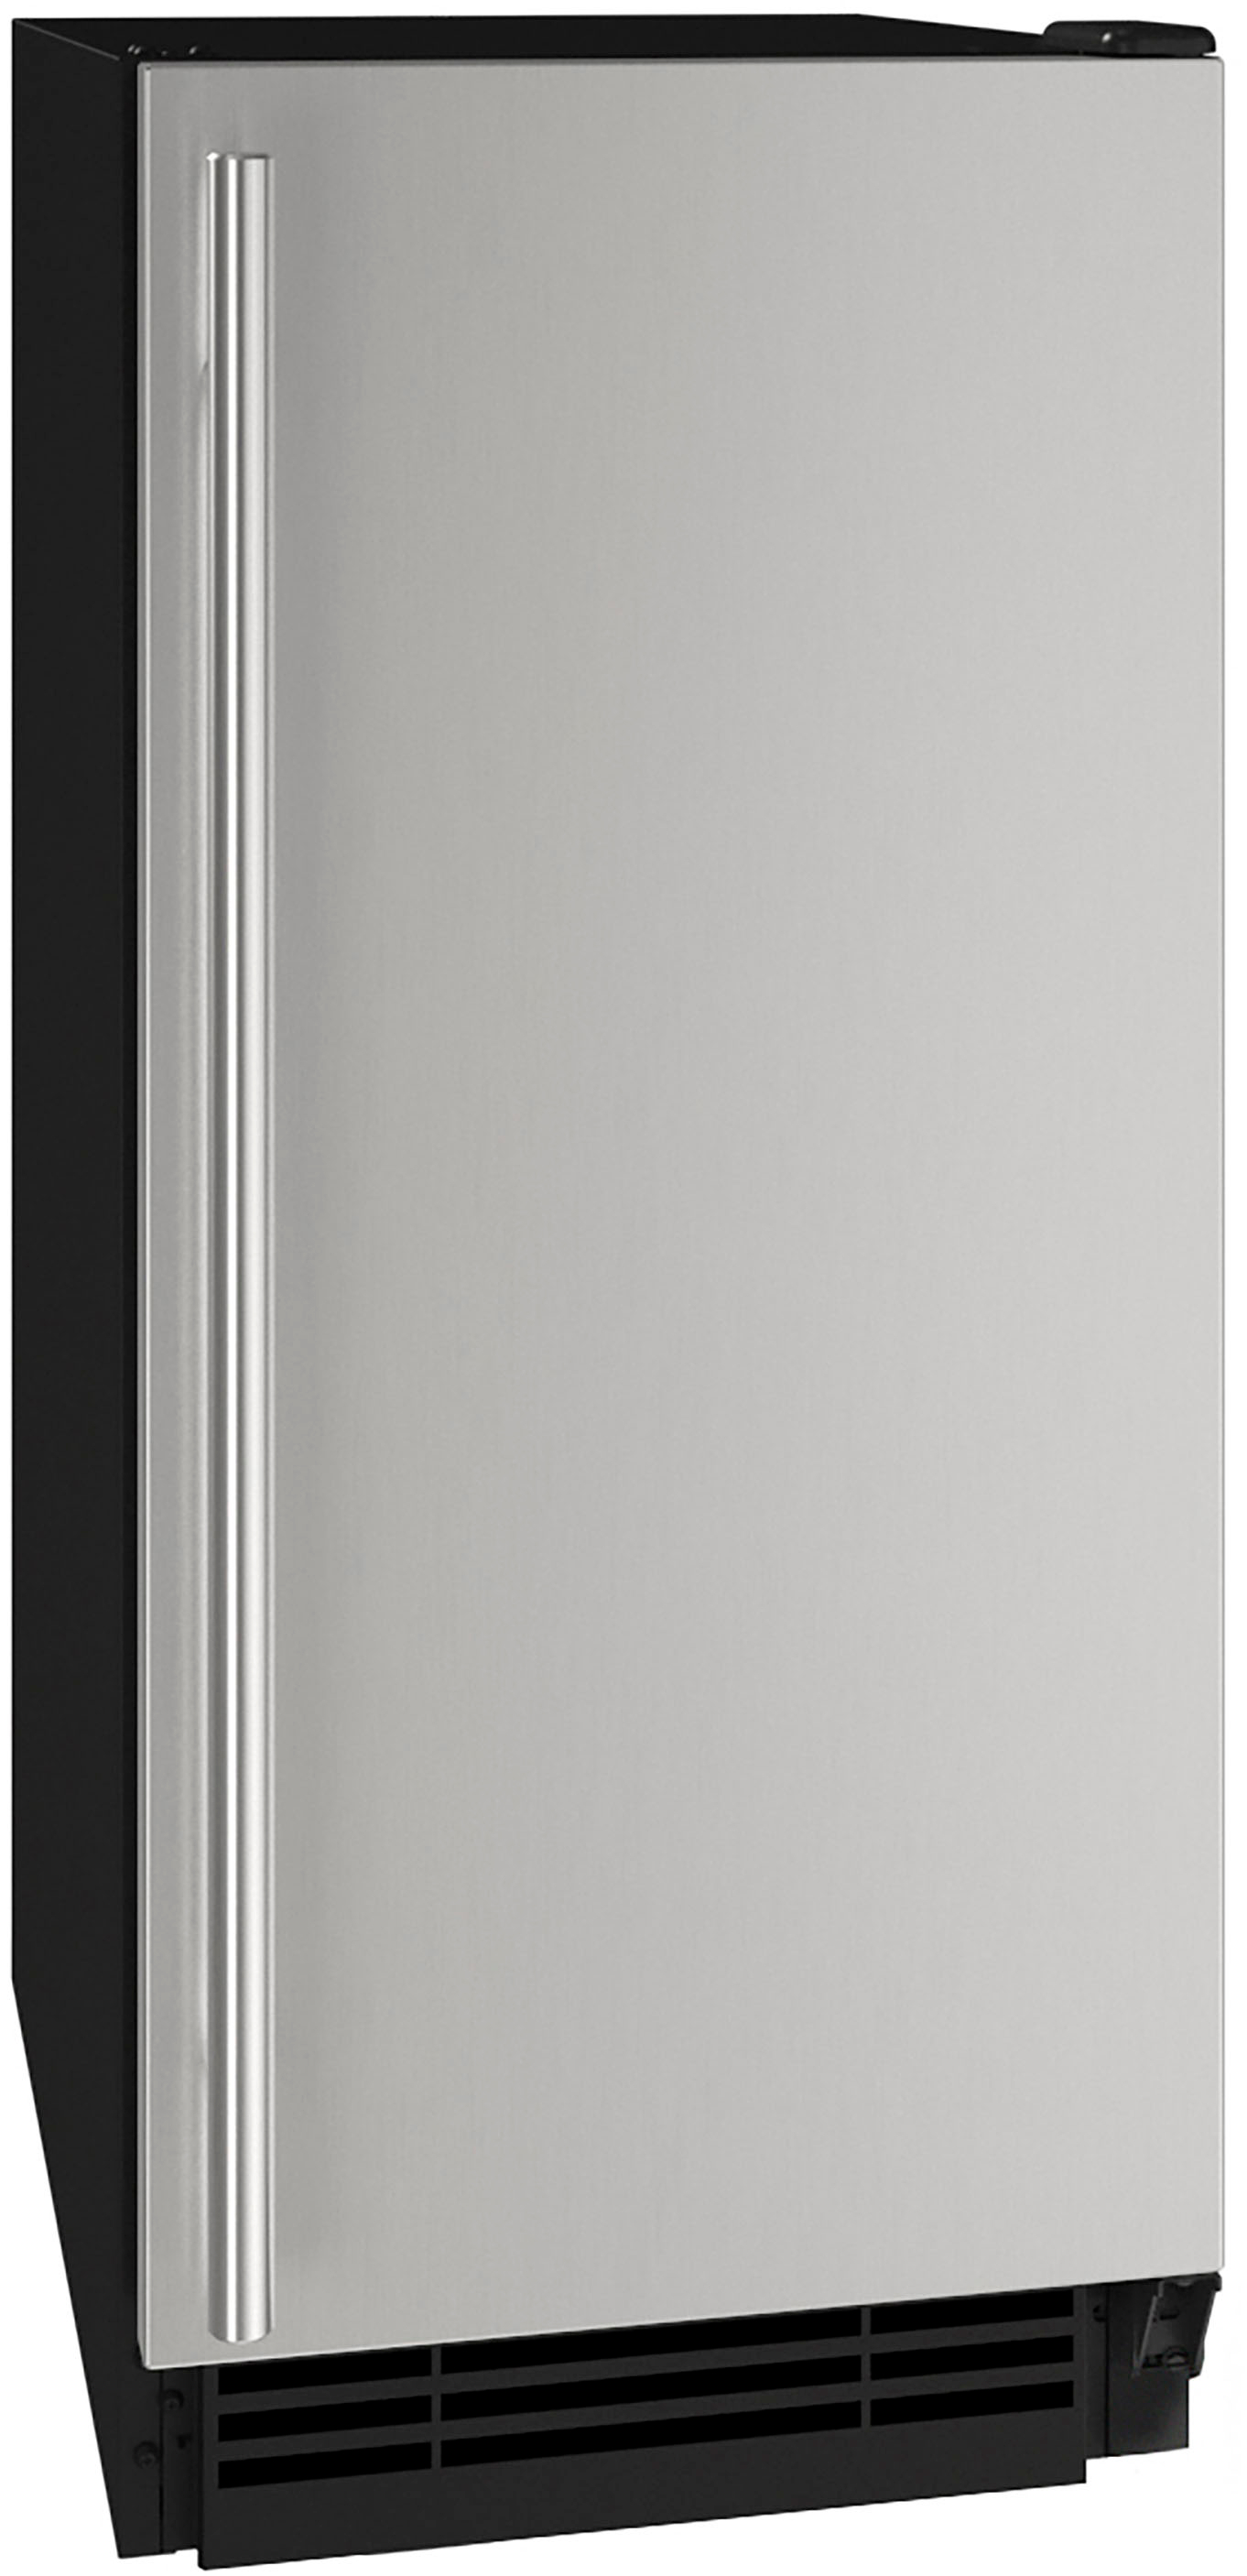 Angle View: U-Line - 15" 25-Lb Freestanding Icemaker - Stainless Steel